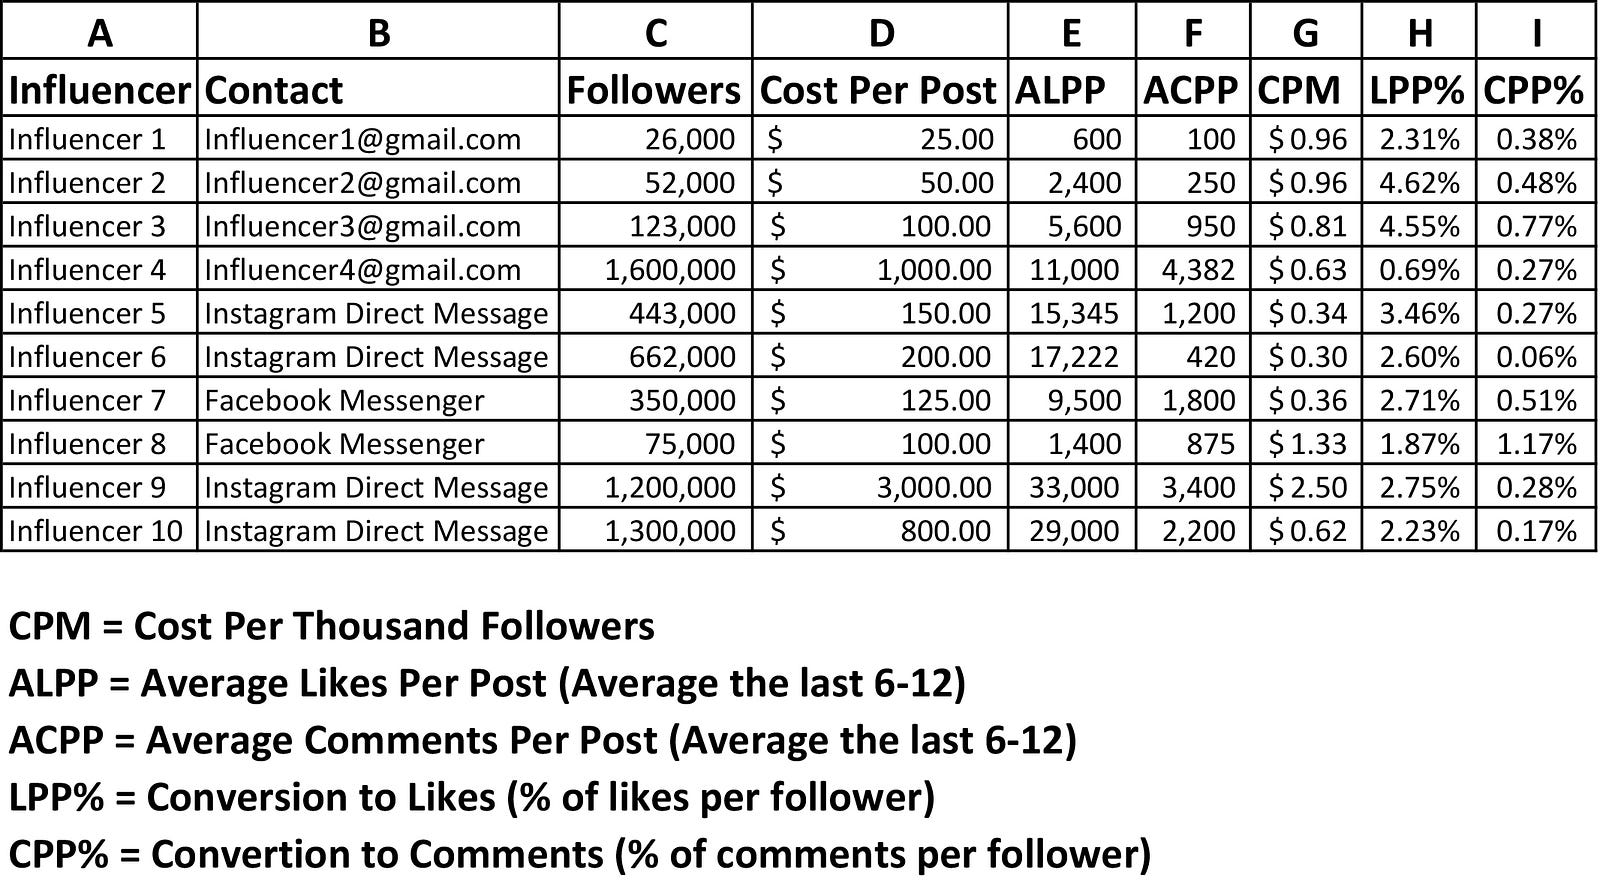 i have had big returns of 400 roi on instagram product posts and there are many deals to be f!   ound from high reach social influencers - instagram followers !   and influencer fees